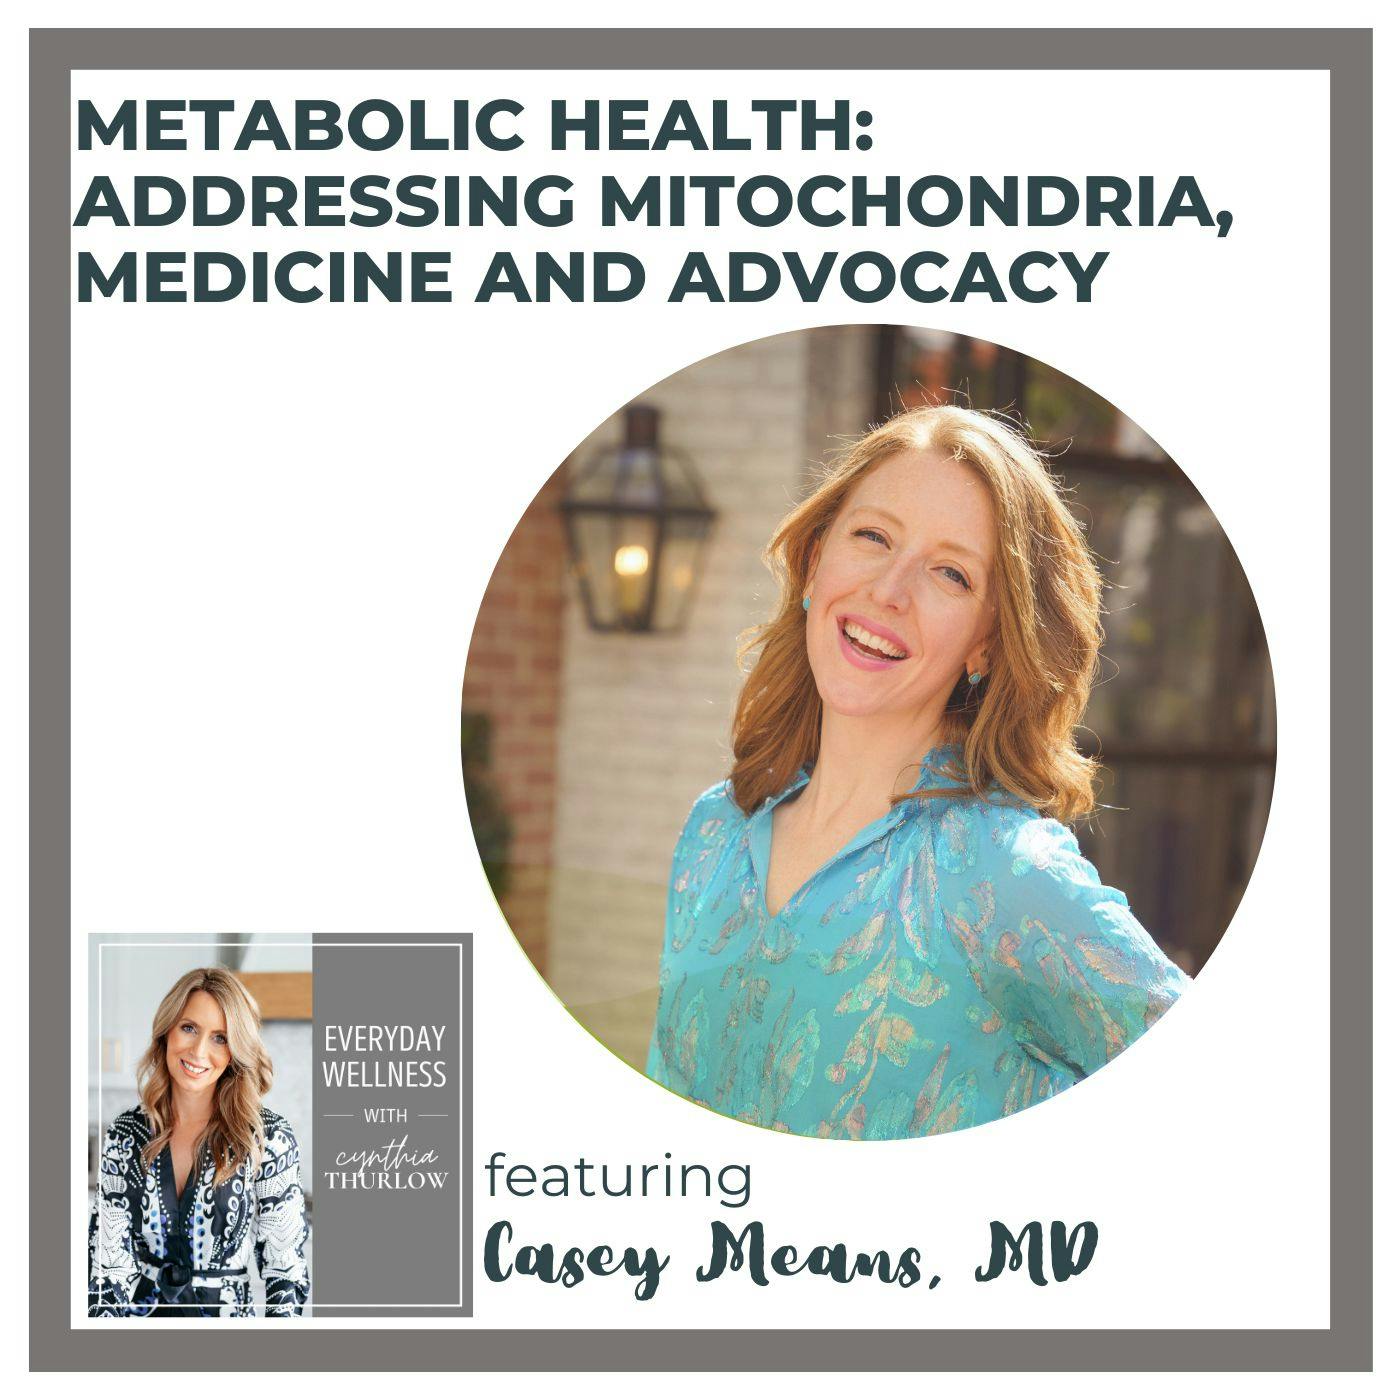 Ep. 361 Metabolic Health: Addressing Mitochondria, Medicine and Advocacy with Casey Means, M.D.